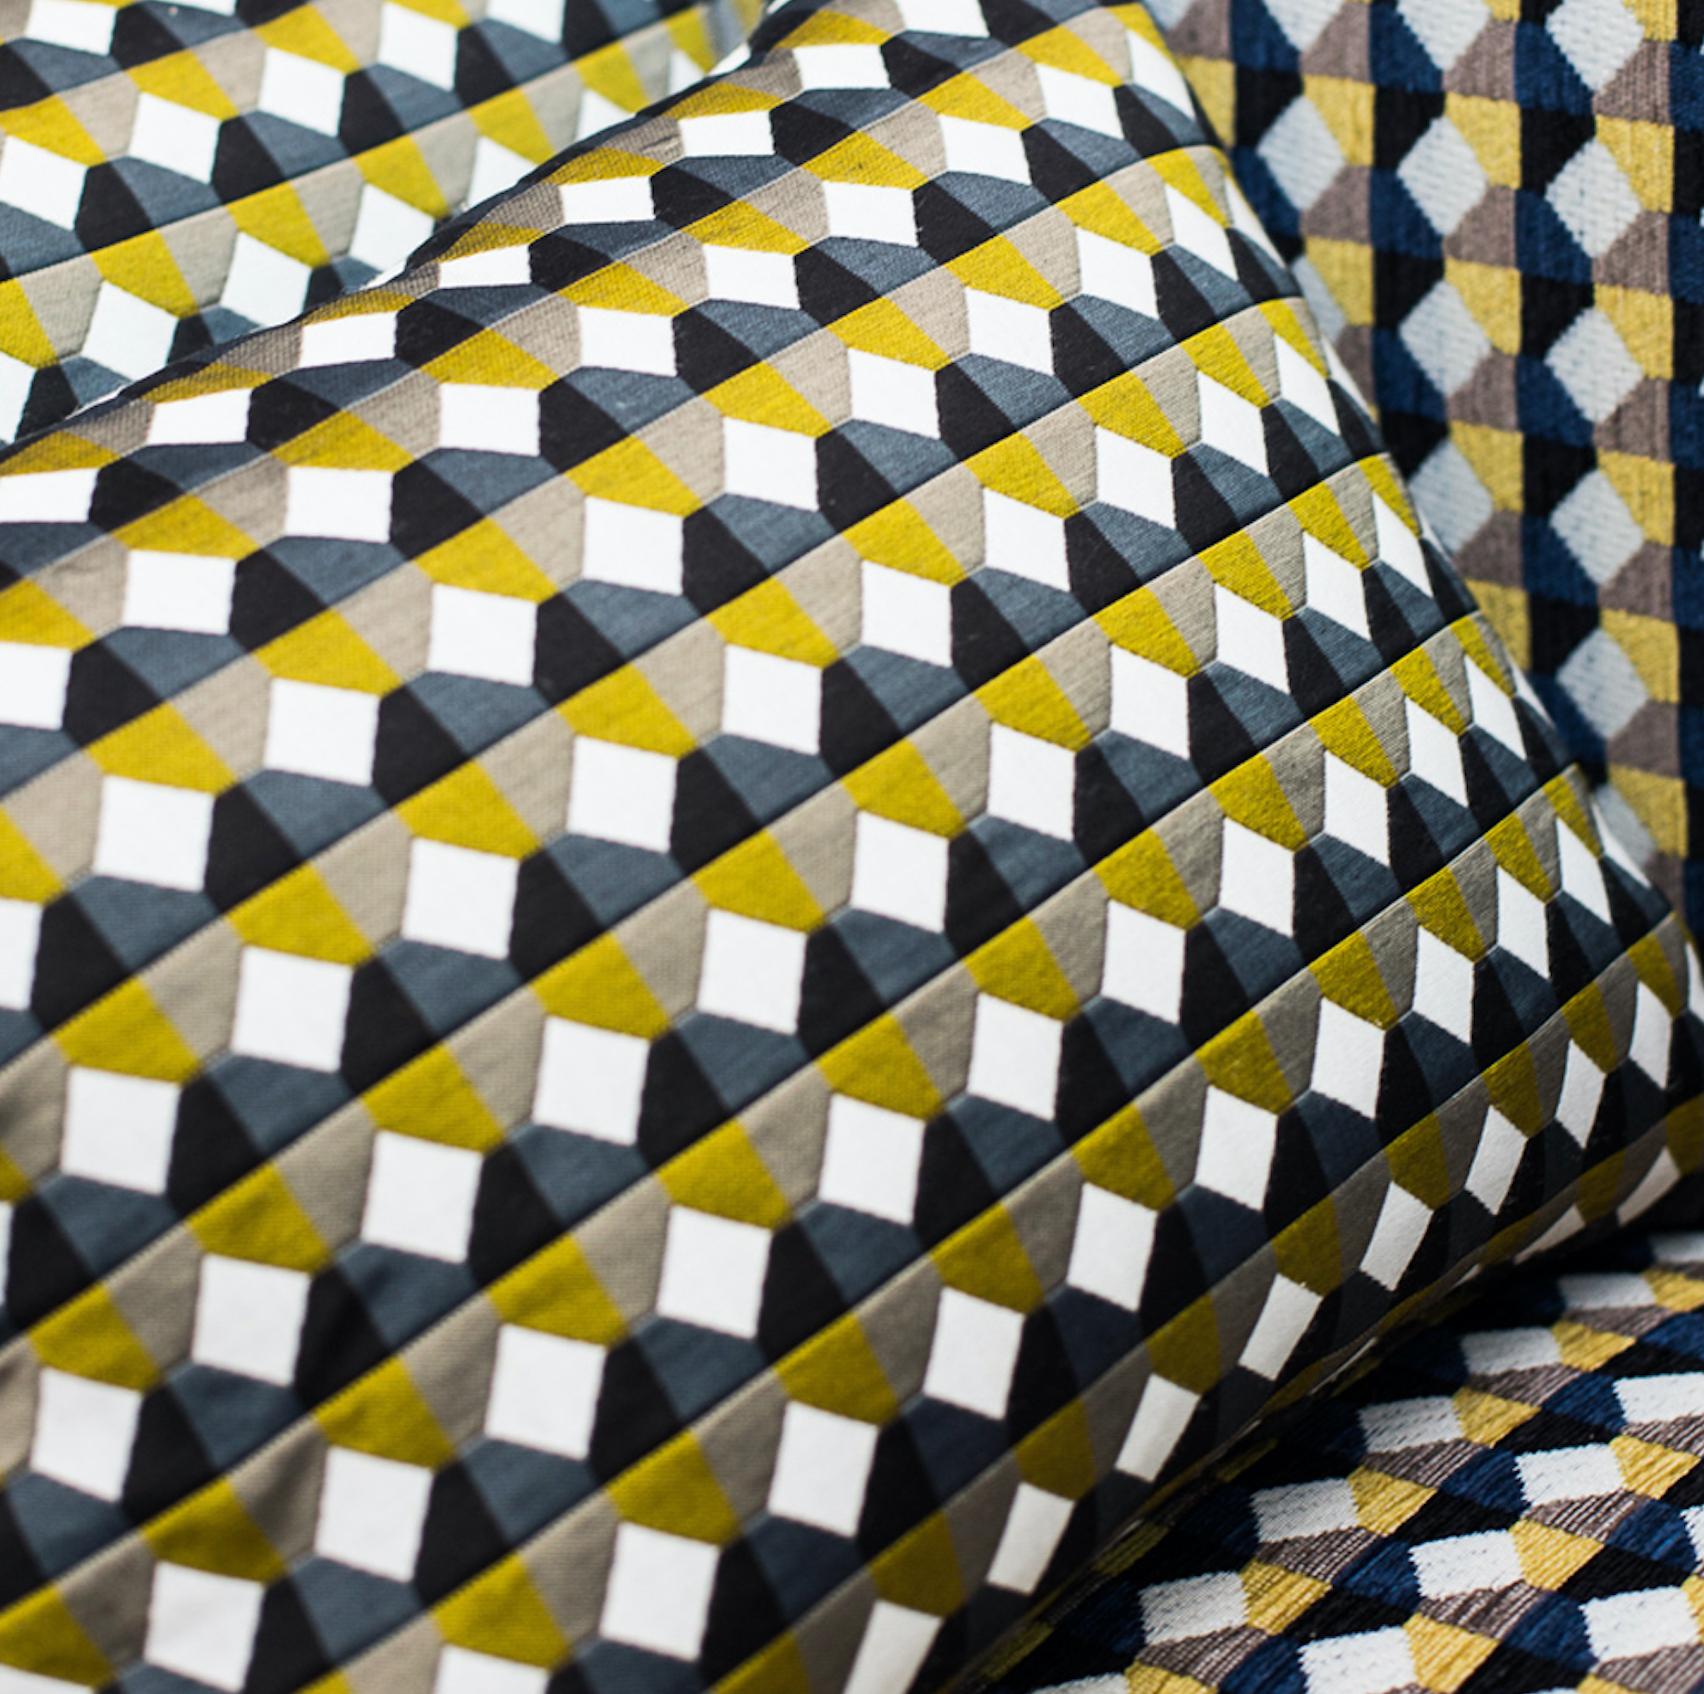 Contemporary Rio Pattern Cushion Curvature Collection Inspired by Brazilian Architecture